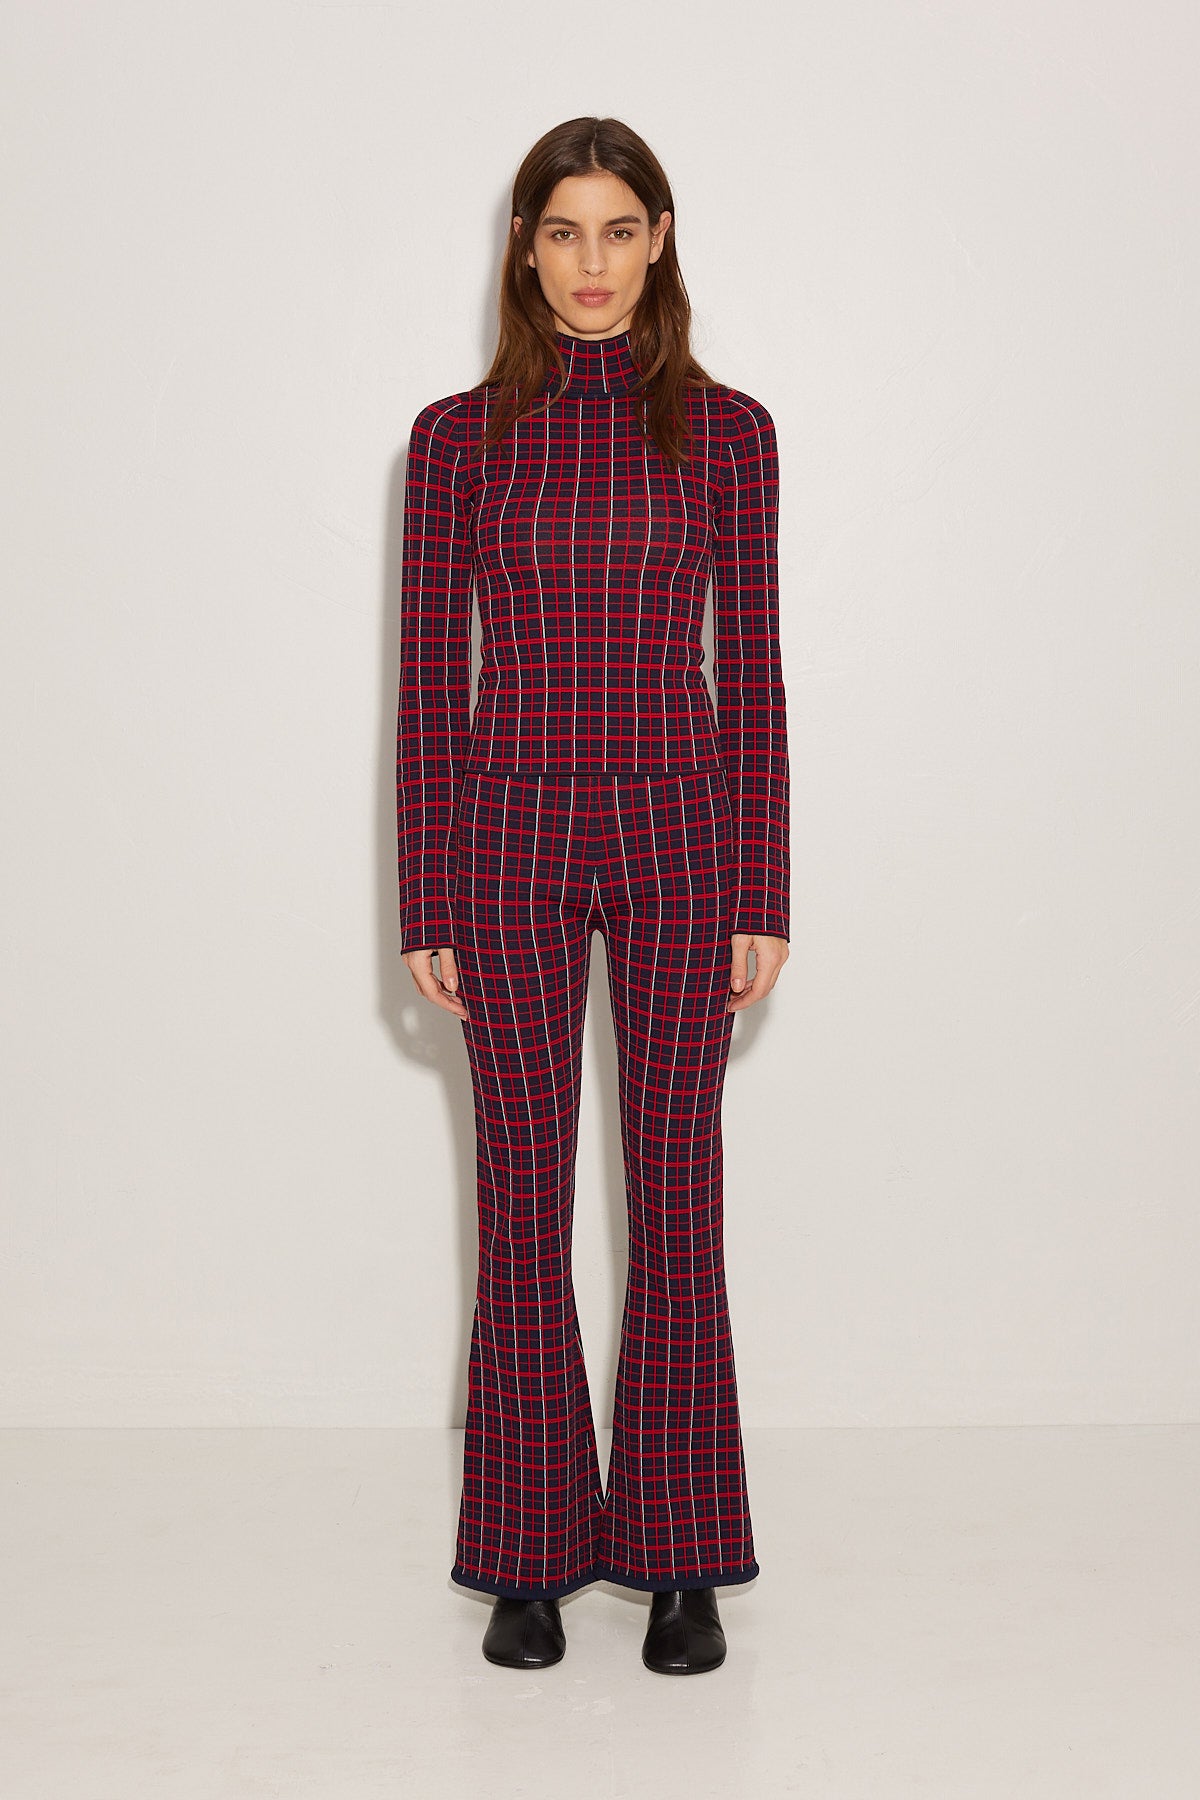 Knits By Rohe Top in Red Plaid